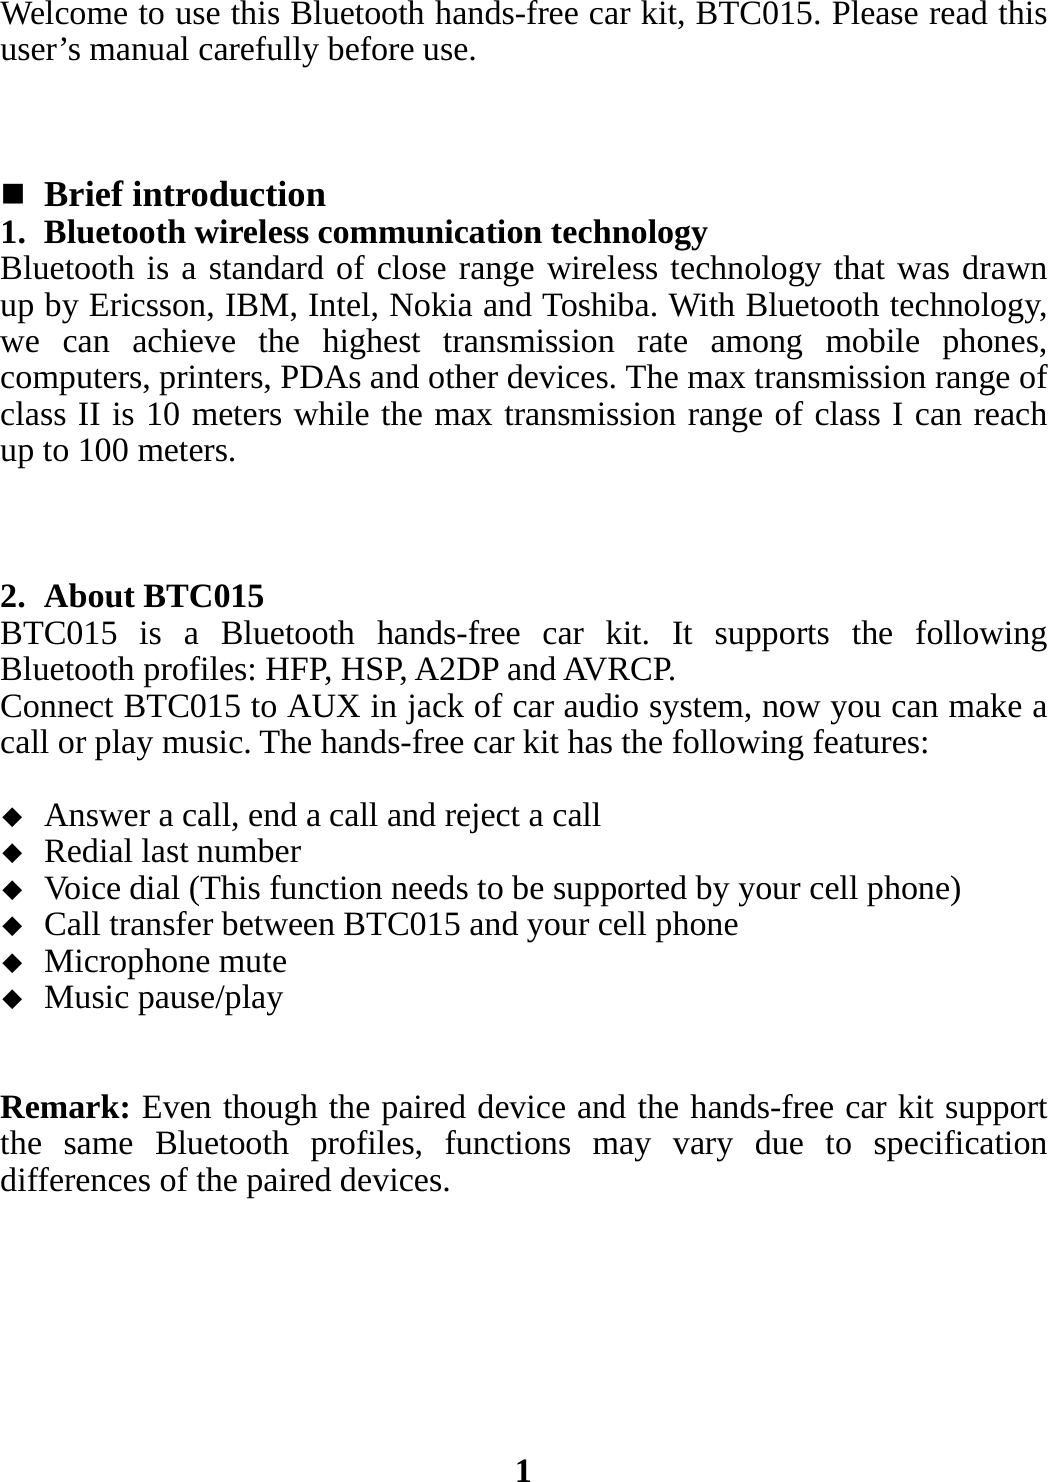 Welcome to use this Bluetooth hands-free car kit, BTC015. Please read this user’s manual carefully before use.     Brief introduction 1. Bluetooth wireless communication technology Bluetooth is a standard of close range wireless technology that was drawn up by Ericsson, IBM, Intel, Nokia and Toshiba. With Bluetooth technology, we can achieve the highest transmission rate among mobile phones, computers, printers, PDAs and other devices. The max transmission range of class II is 10 meters while the max transmission range of class I can reach up to 100 meters.    2. About BTC015 BTC015 is a Bluetooth hands-free car kit. It supports the following Bluetooth profiles: HFP, HSP, A2DP and AVRCP.   Connect BTC015 to AUX in jack of car audio system, now you can make a call or play music. The hands-free car kit has the following features:   Answer a call, end a call and reject a call  Redial last number  Voice dial (This function needs to be supported by your cell phone)  Call transfer between BTC015 and your cell phone  Microphone mute  Music pause/play   Remark: Even though the paired device and the hands-free car kit support the same Bluetooth profiles, functions may vary due to specification differences of the paired devices.        1 